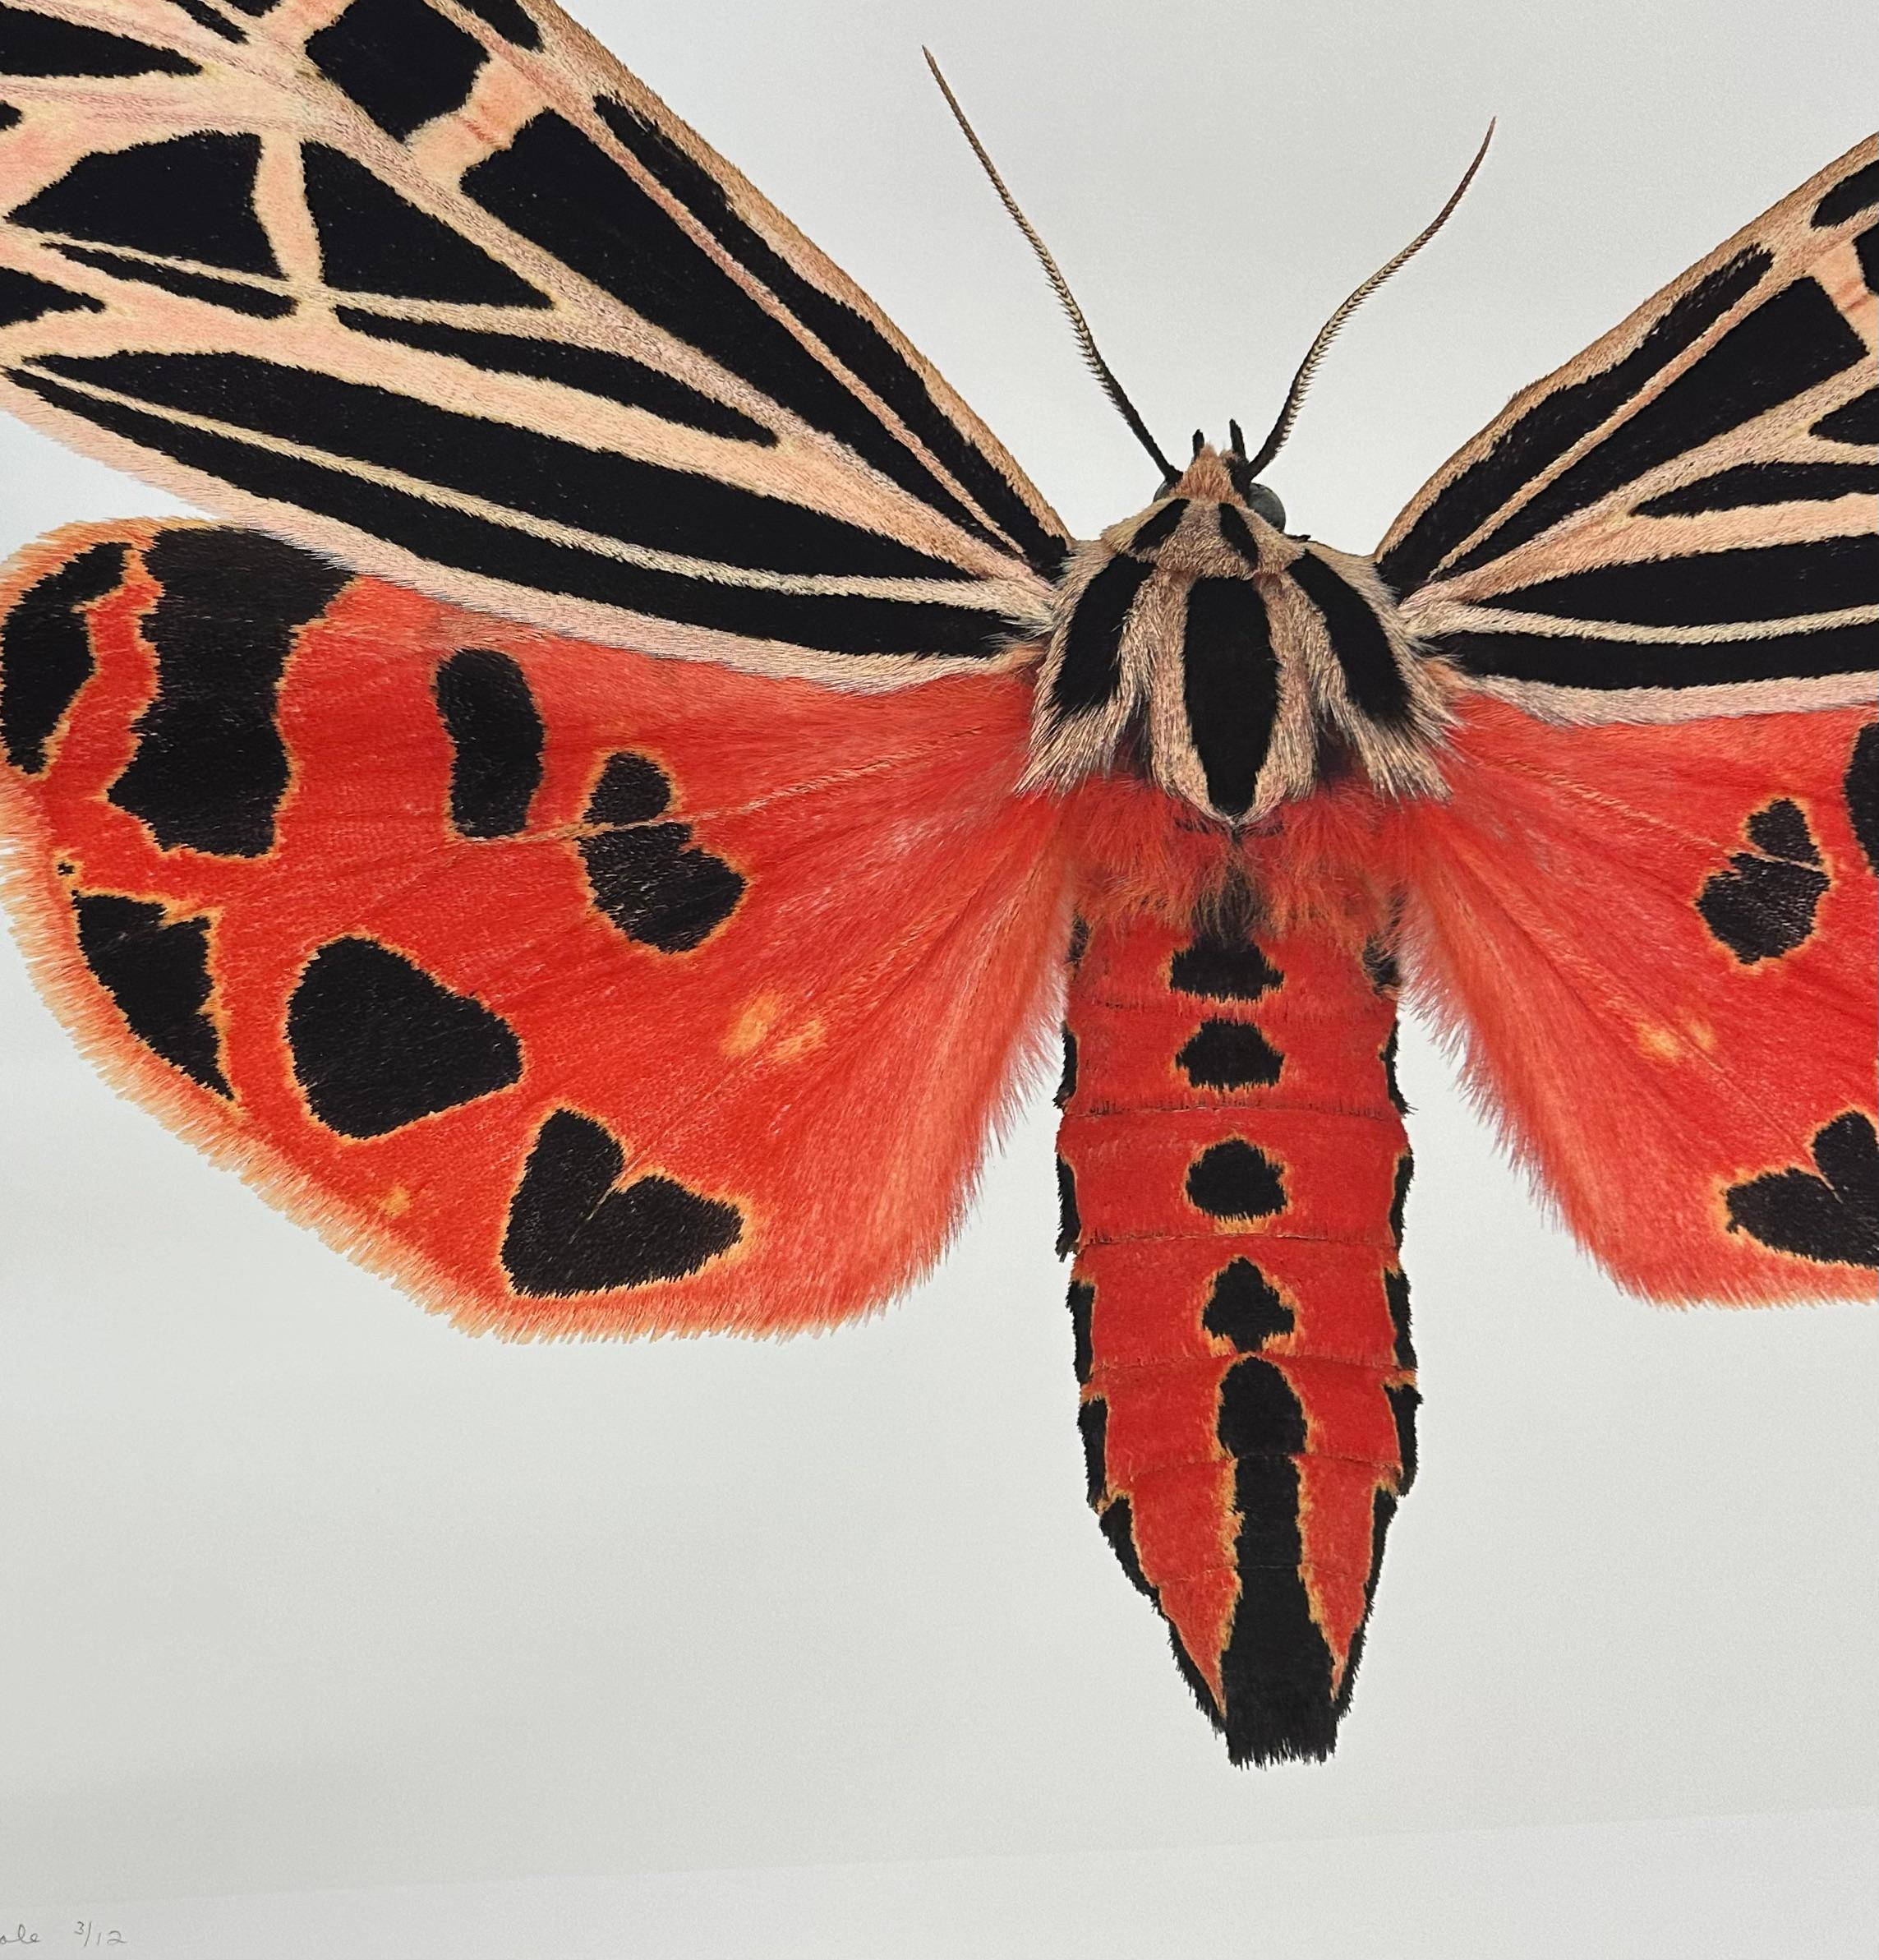 In this hyper-detailed archival pigment print on watercolor paper, a coral red moth with black markings on its wings and abdomen and pale peach on its upper wings is dramatic and vibrant against a solid white background. 

Price shown is the